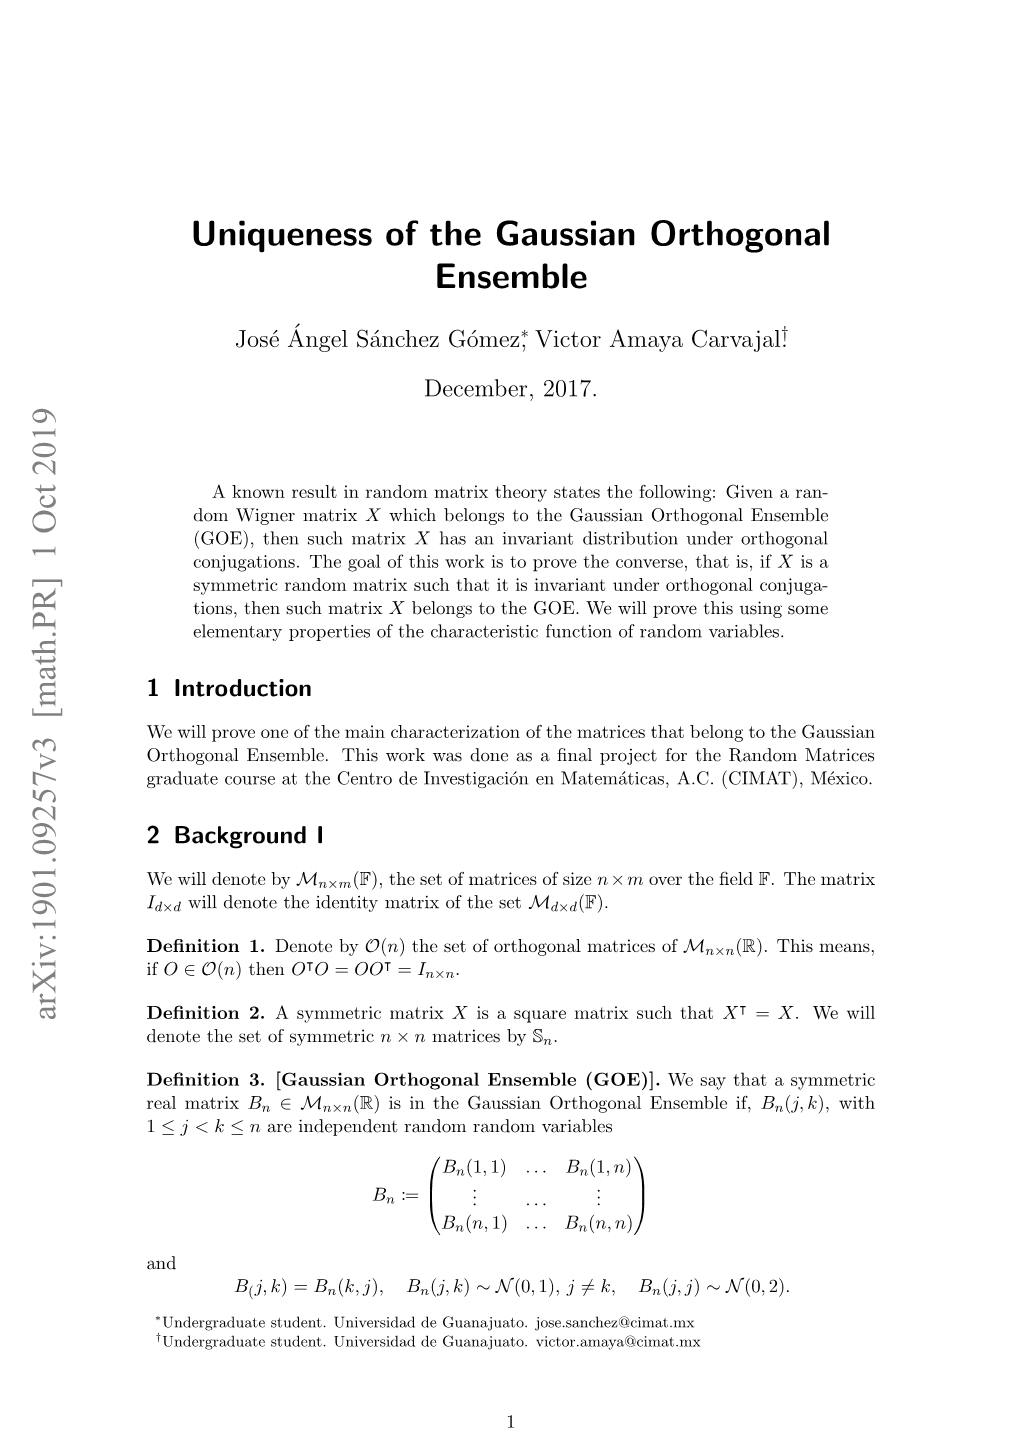 Uniqueness of the Gaussian Orthogonal Ensemble